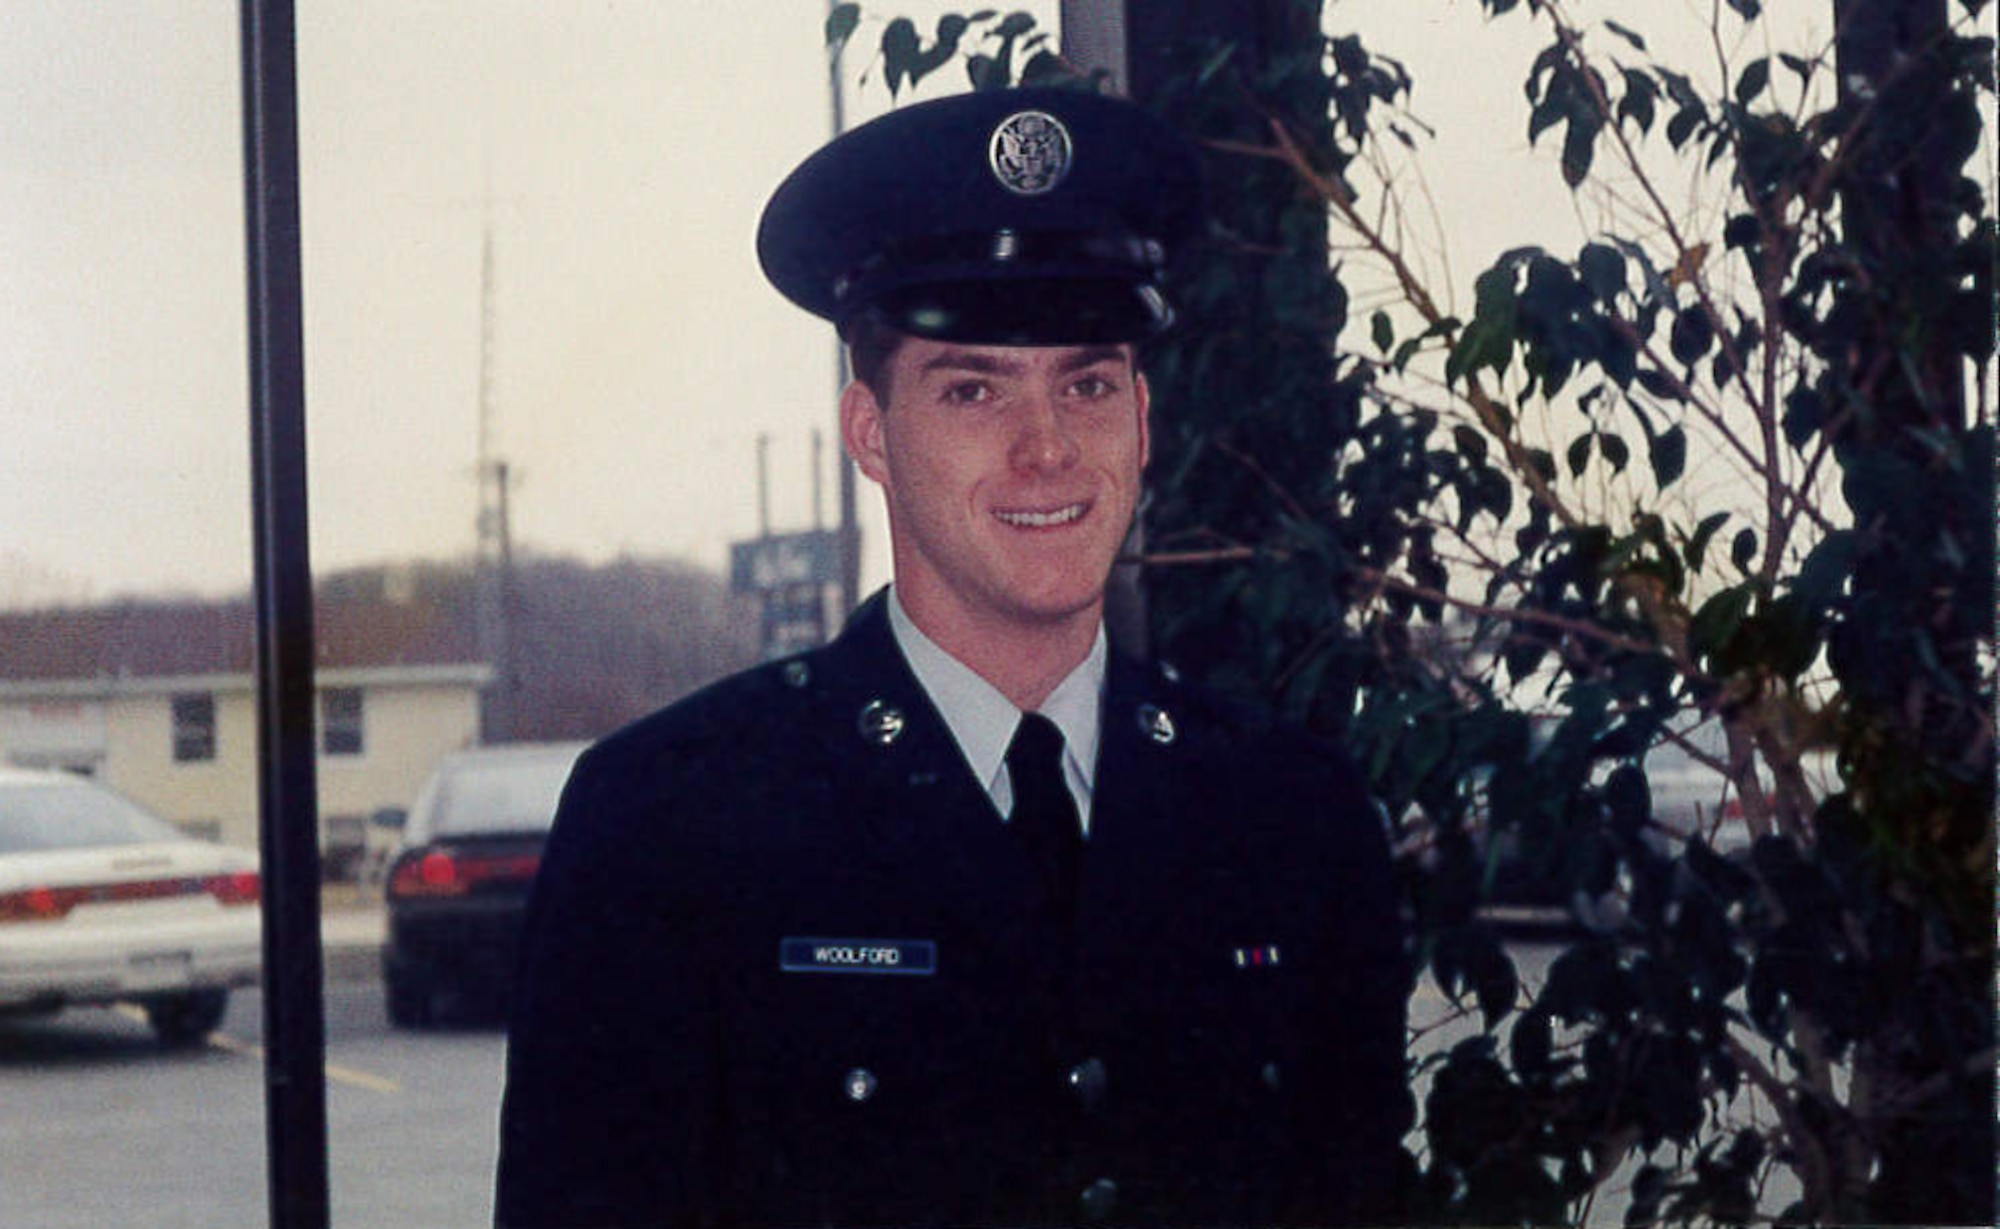 Then, Airman Jeffrey Woolford, a crew chief, poses for a photo in his dress uniform shortly after graduating U.S. Air Force Basic Military Training. Maj. (Dr.) Woolford enlisted in the Air Force as an aircraft maintenance crew chief in 1989, and commissioned as an A-10 Thunderbolt II pilot in 1998. (U.S. Air Force courtesy photo)